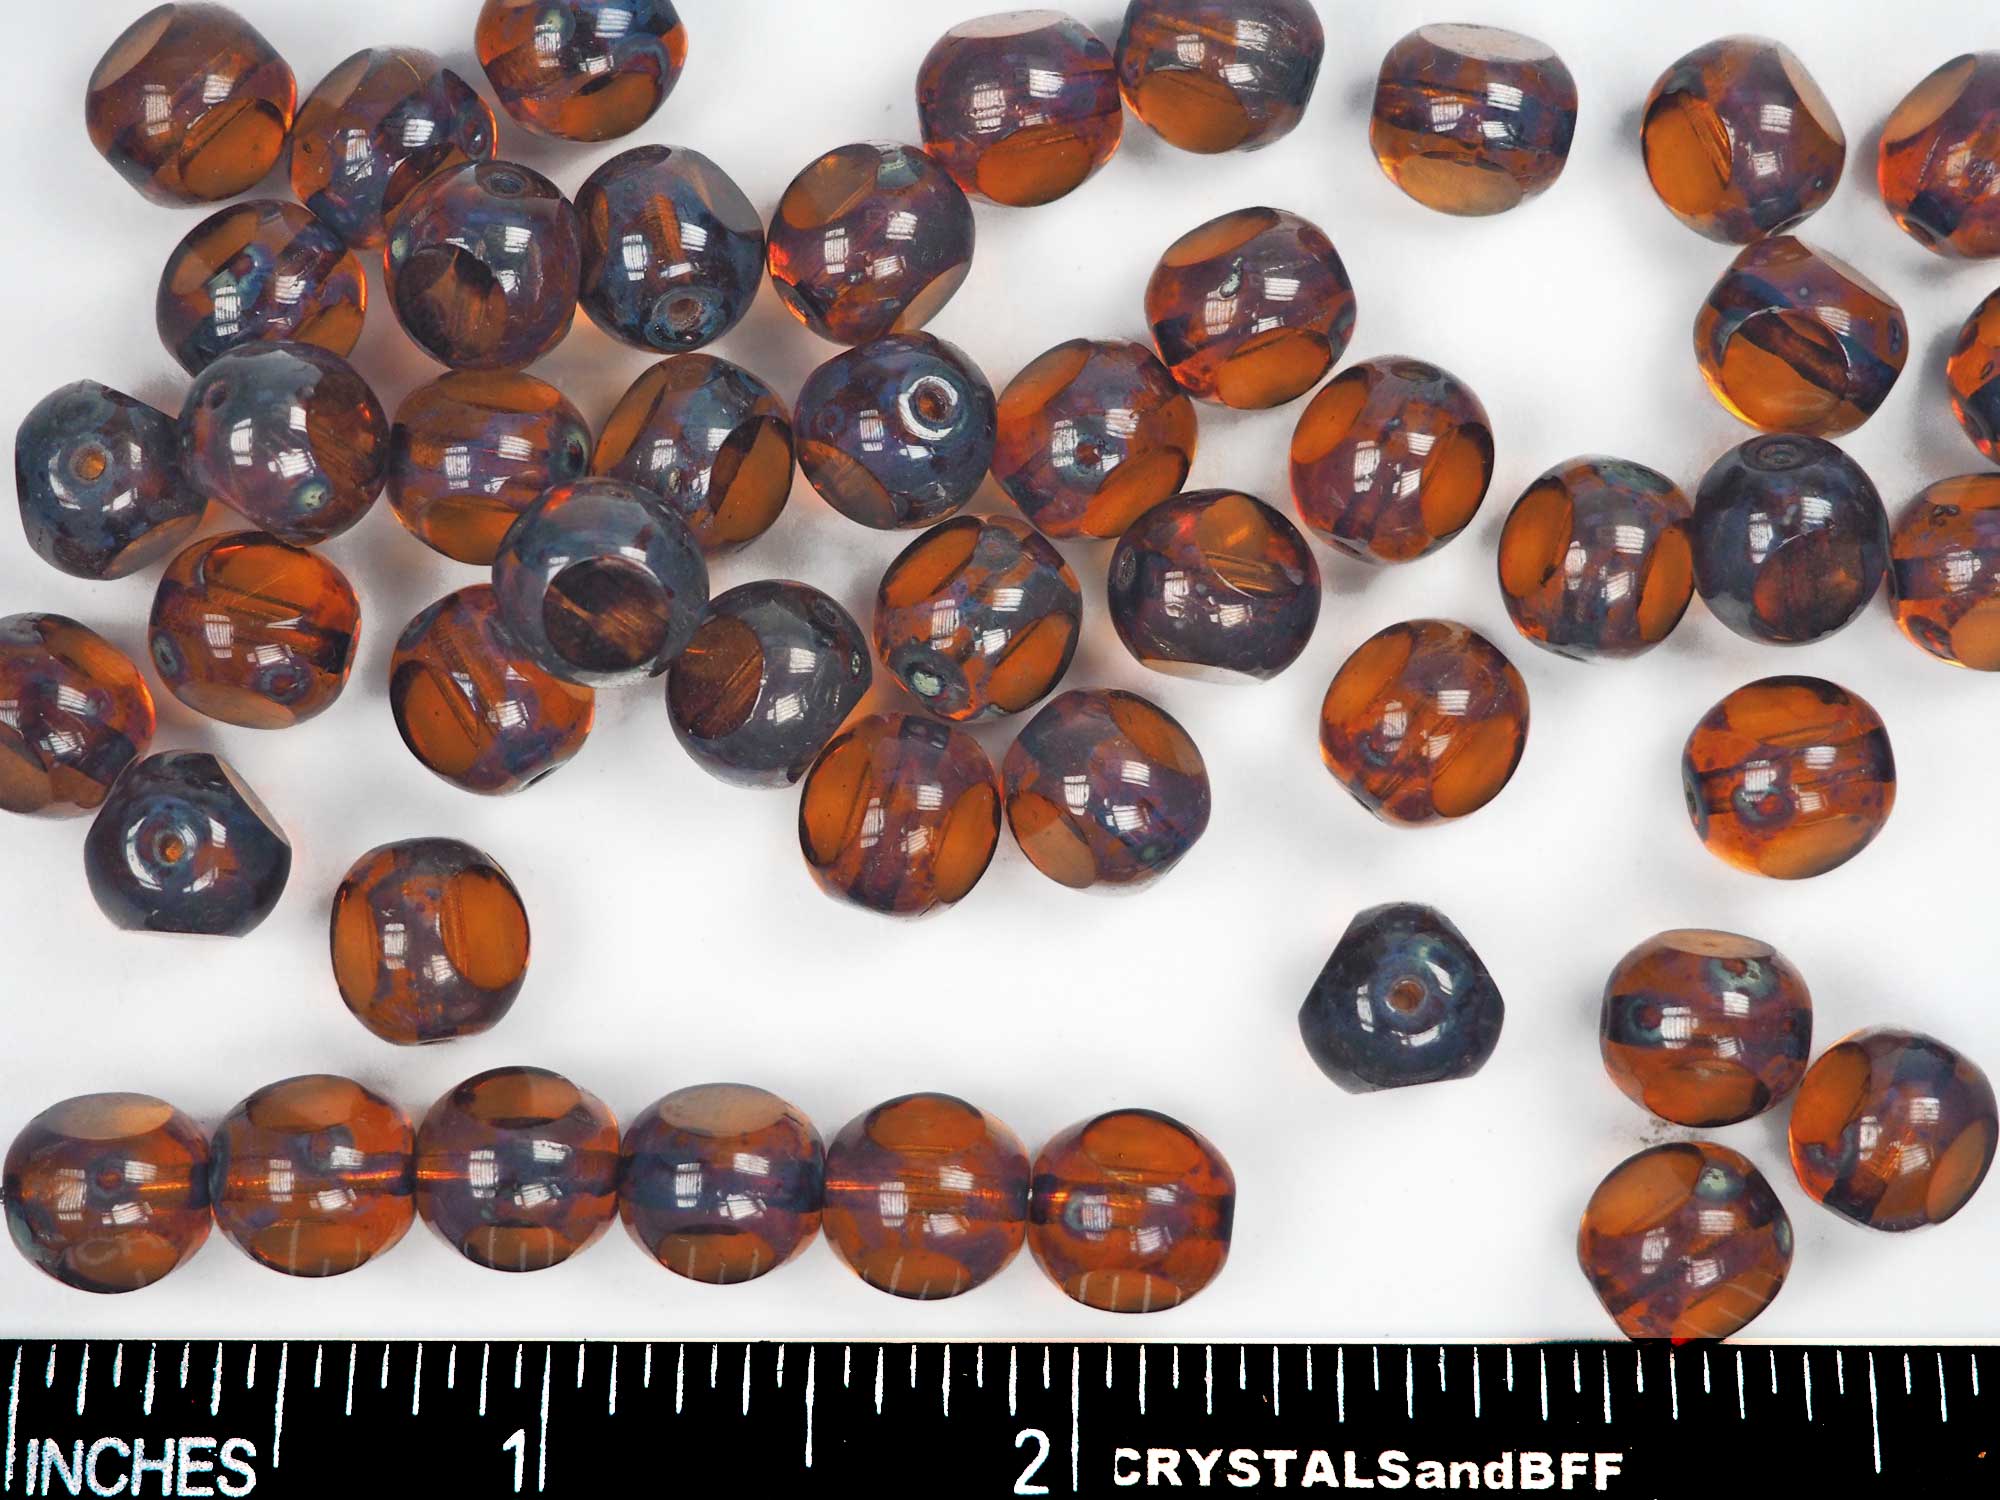 Czech Glass 3-Cut Round Window Beads (Soccer Ball Bead) Art. 151-19501 in size 10mm, Light Brown Picasso coating, 24pcs, P883